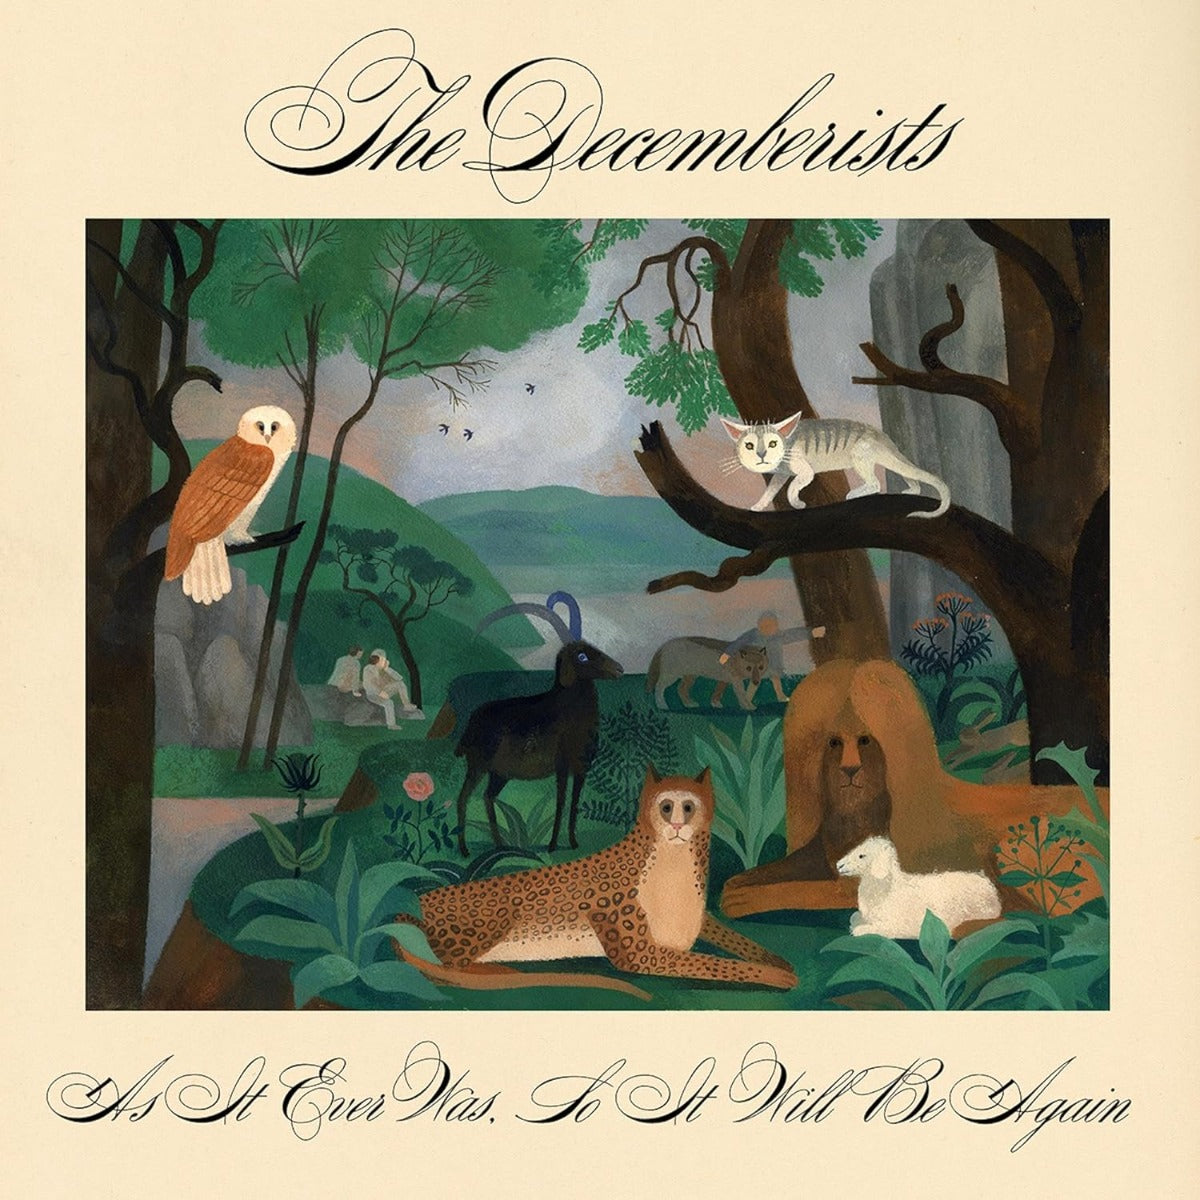 The Decemberists - As It Ever Was, So It Will Be Again (Indie Exclusive, Fruit Punch Vinyl) (2 LP) - Joco Records